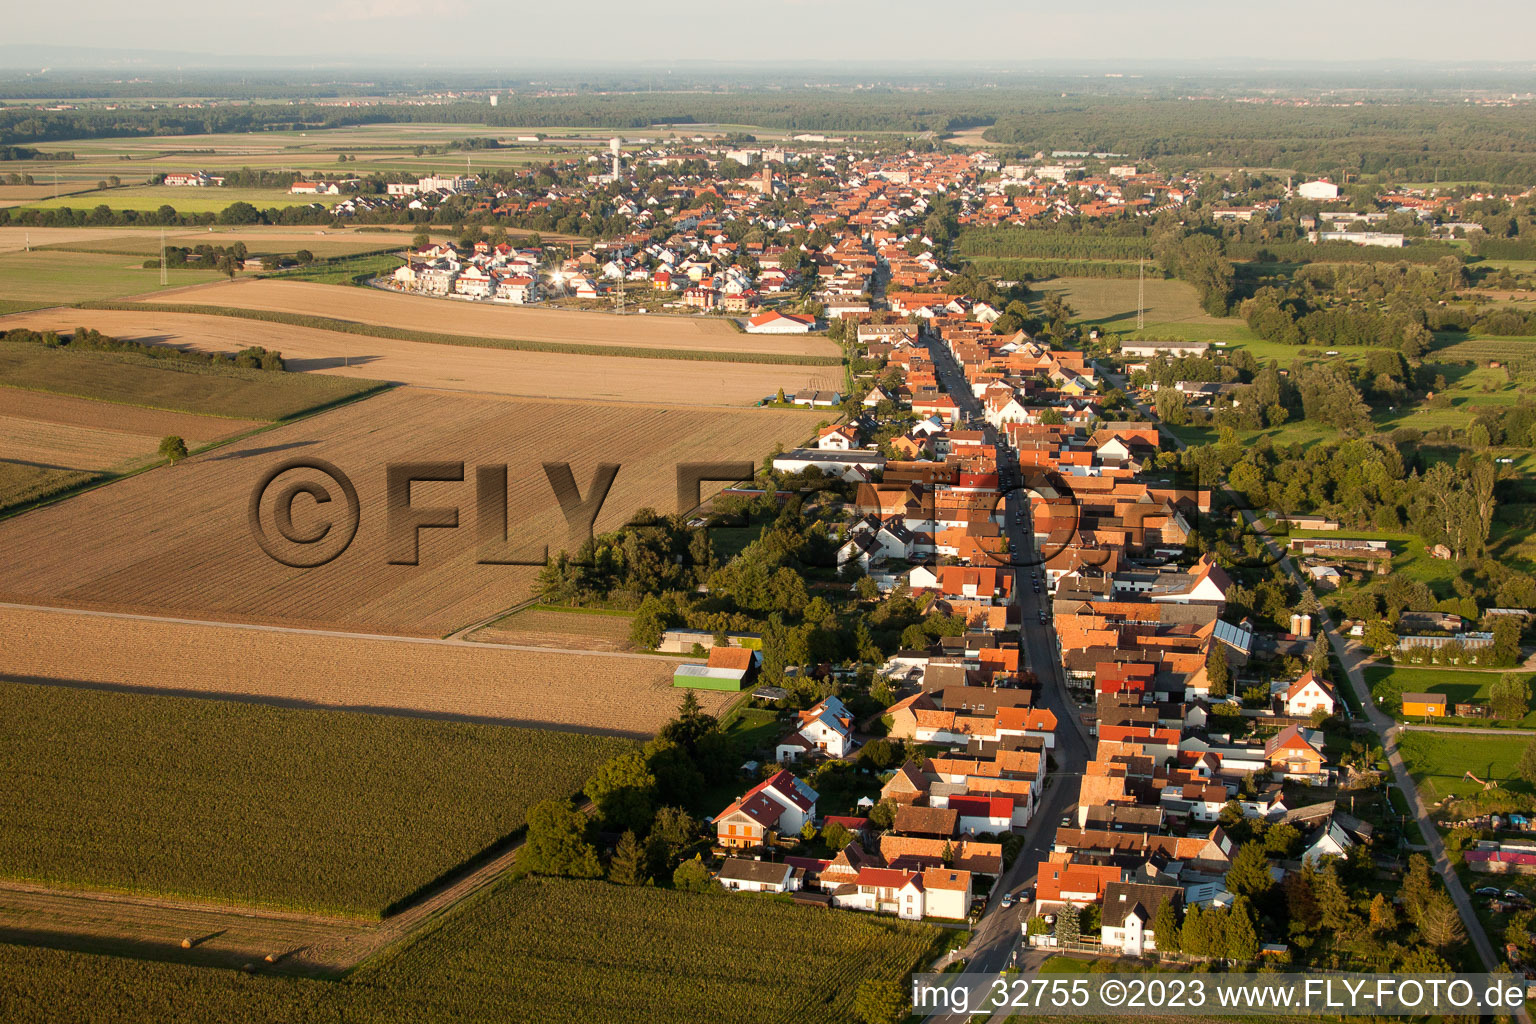 Saarstr in Kandel in the state Rhineland-Palatinate, Germany seen from a drone